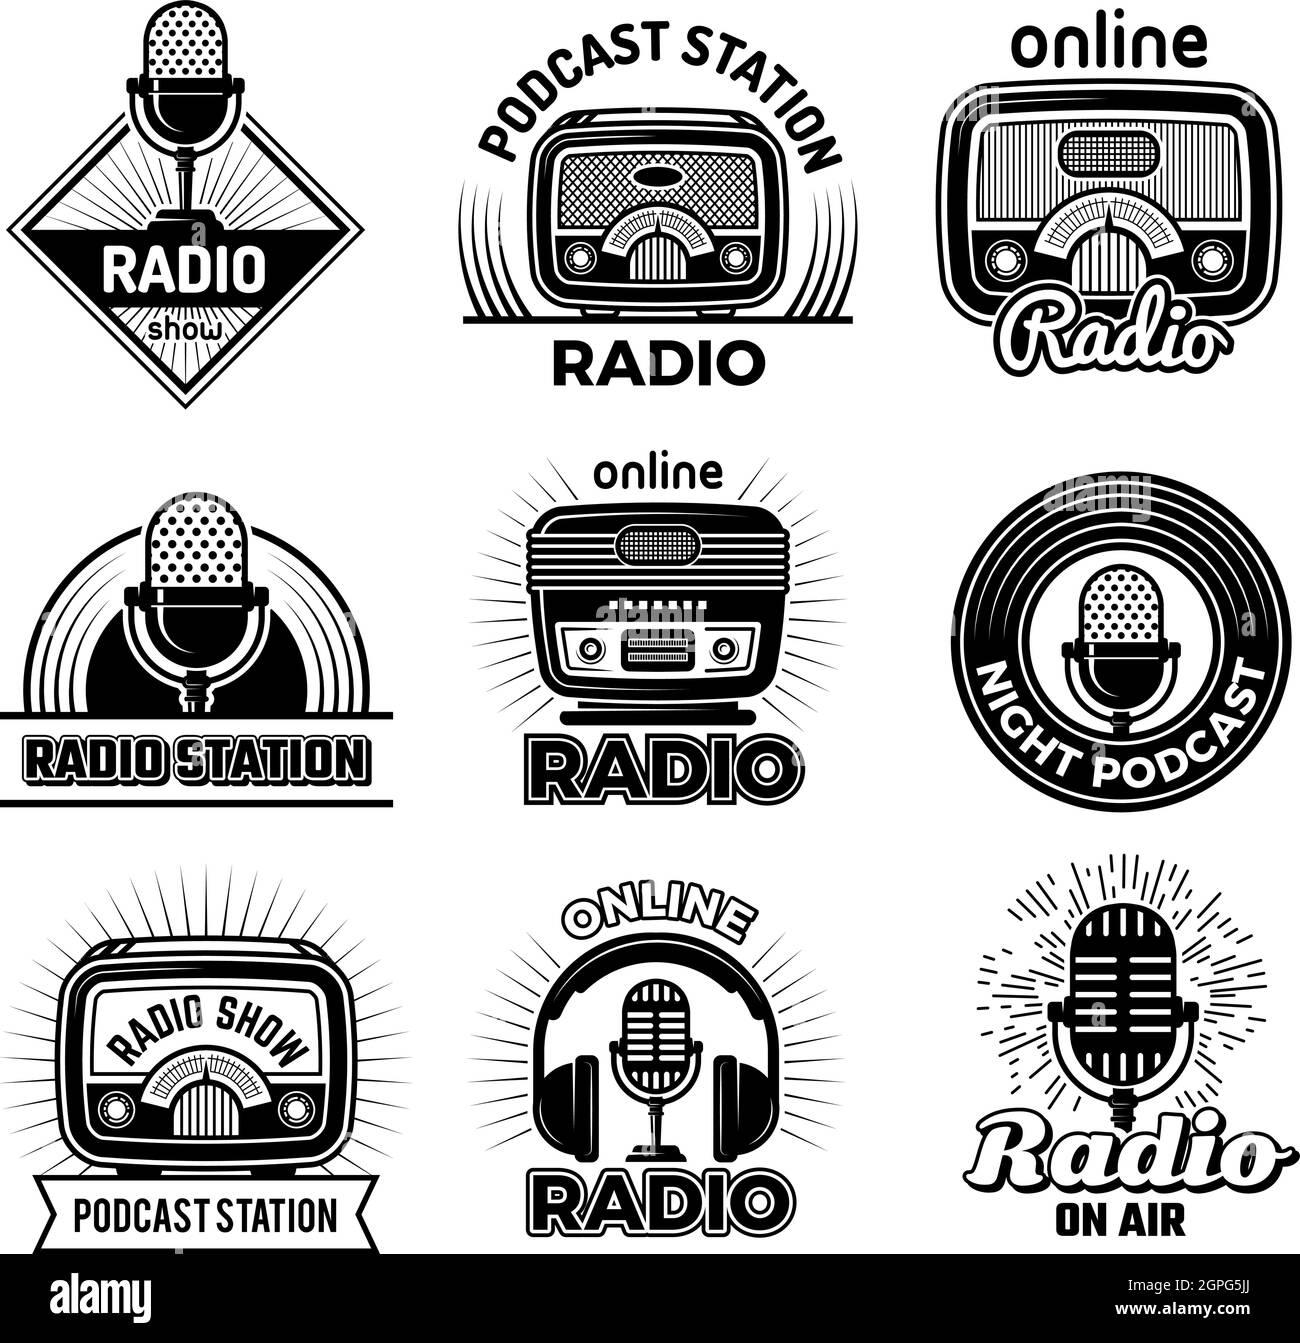 Radio badges. Music talking podcast air streaming show radio logos emblem with headset and microphones vector illustrations Stock Vector